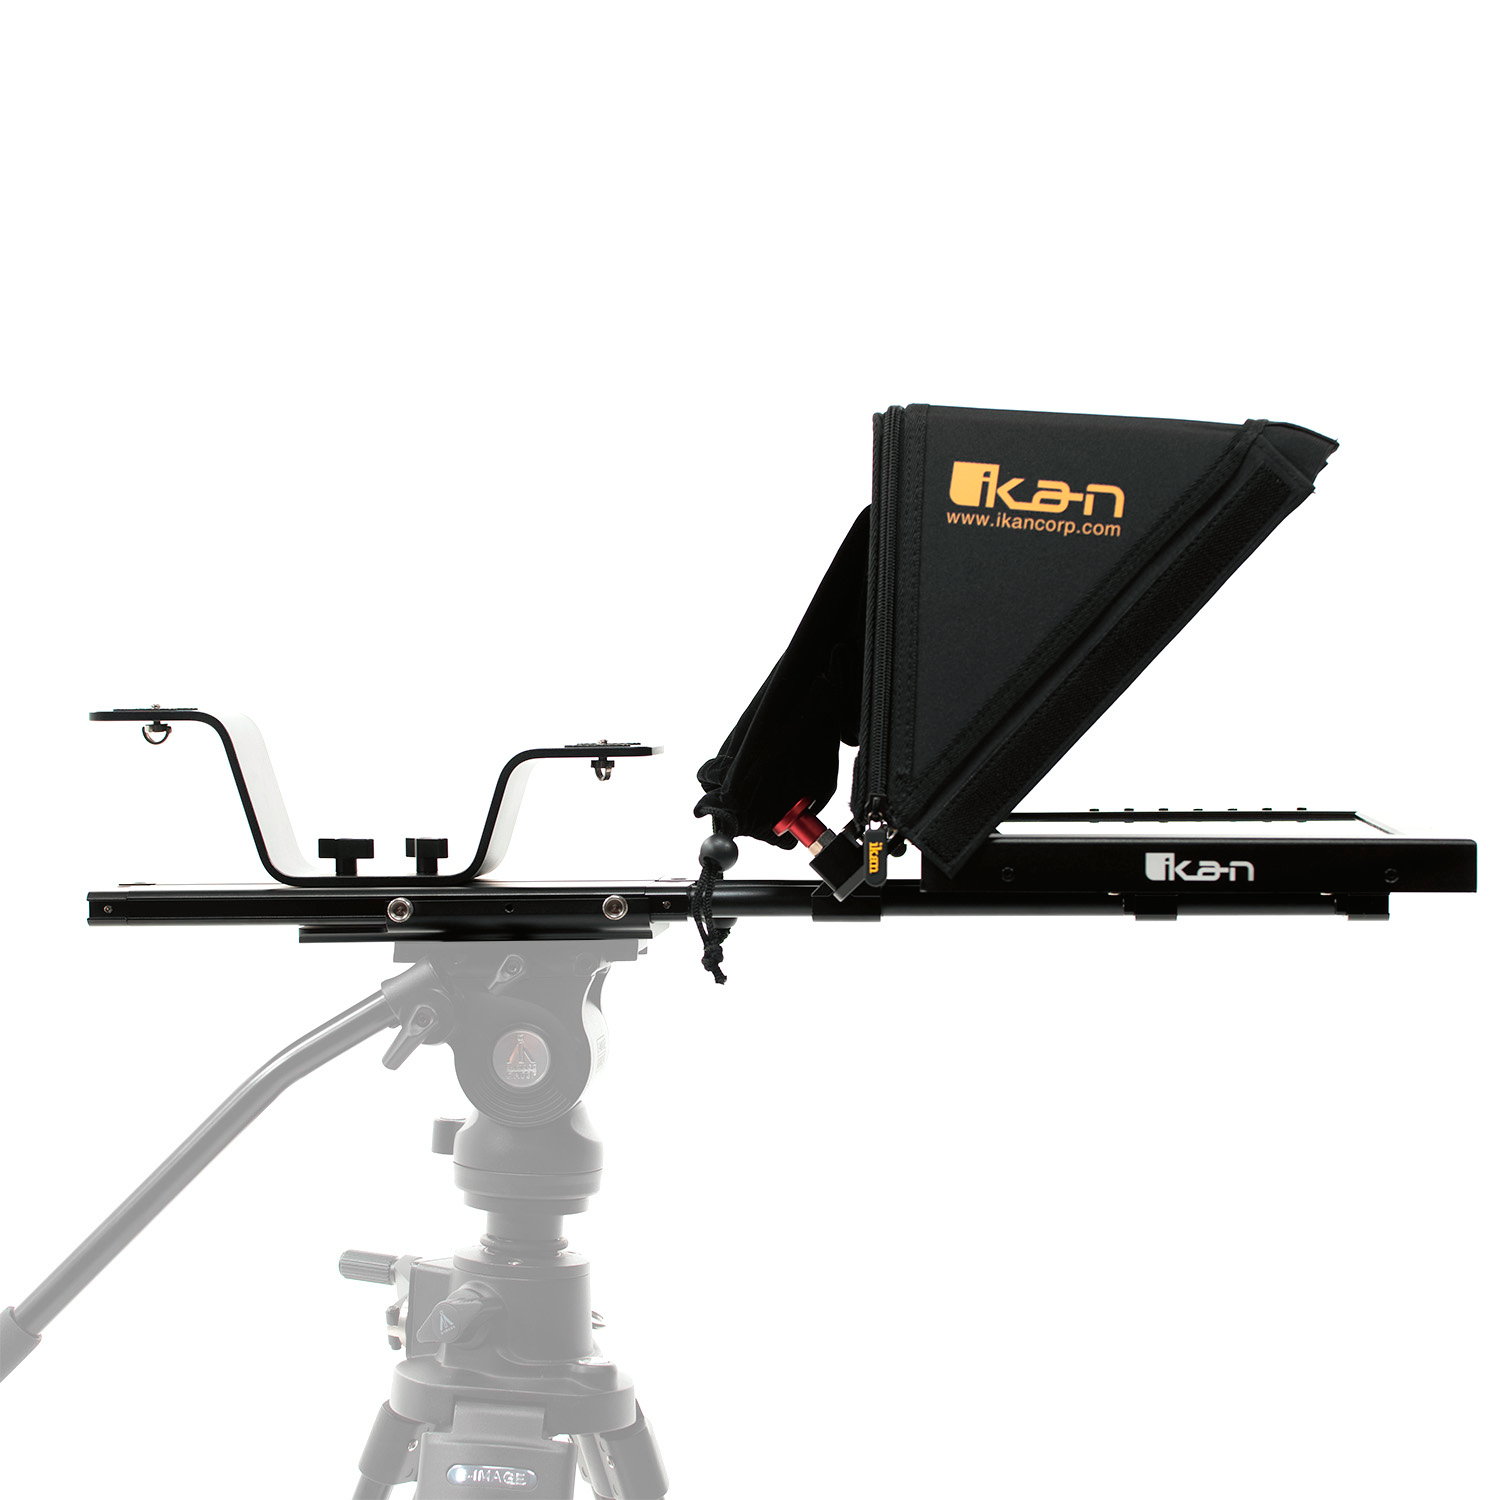 ikan P2P Interview System with 2 x 12" Teleprompters